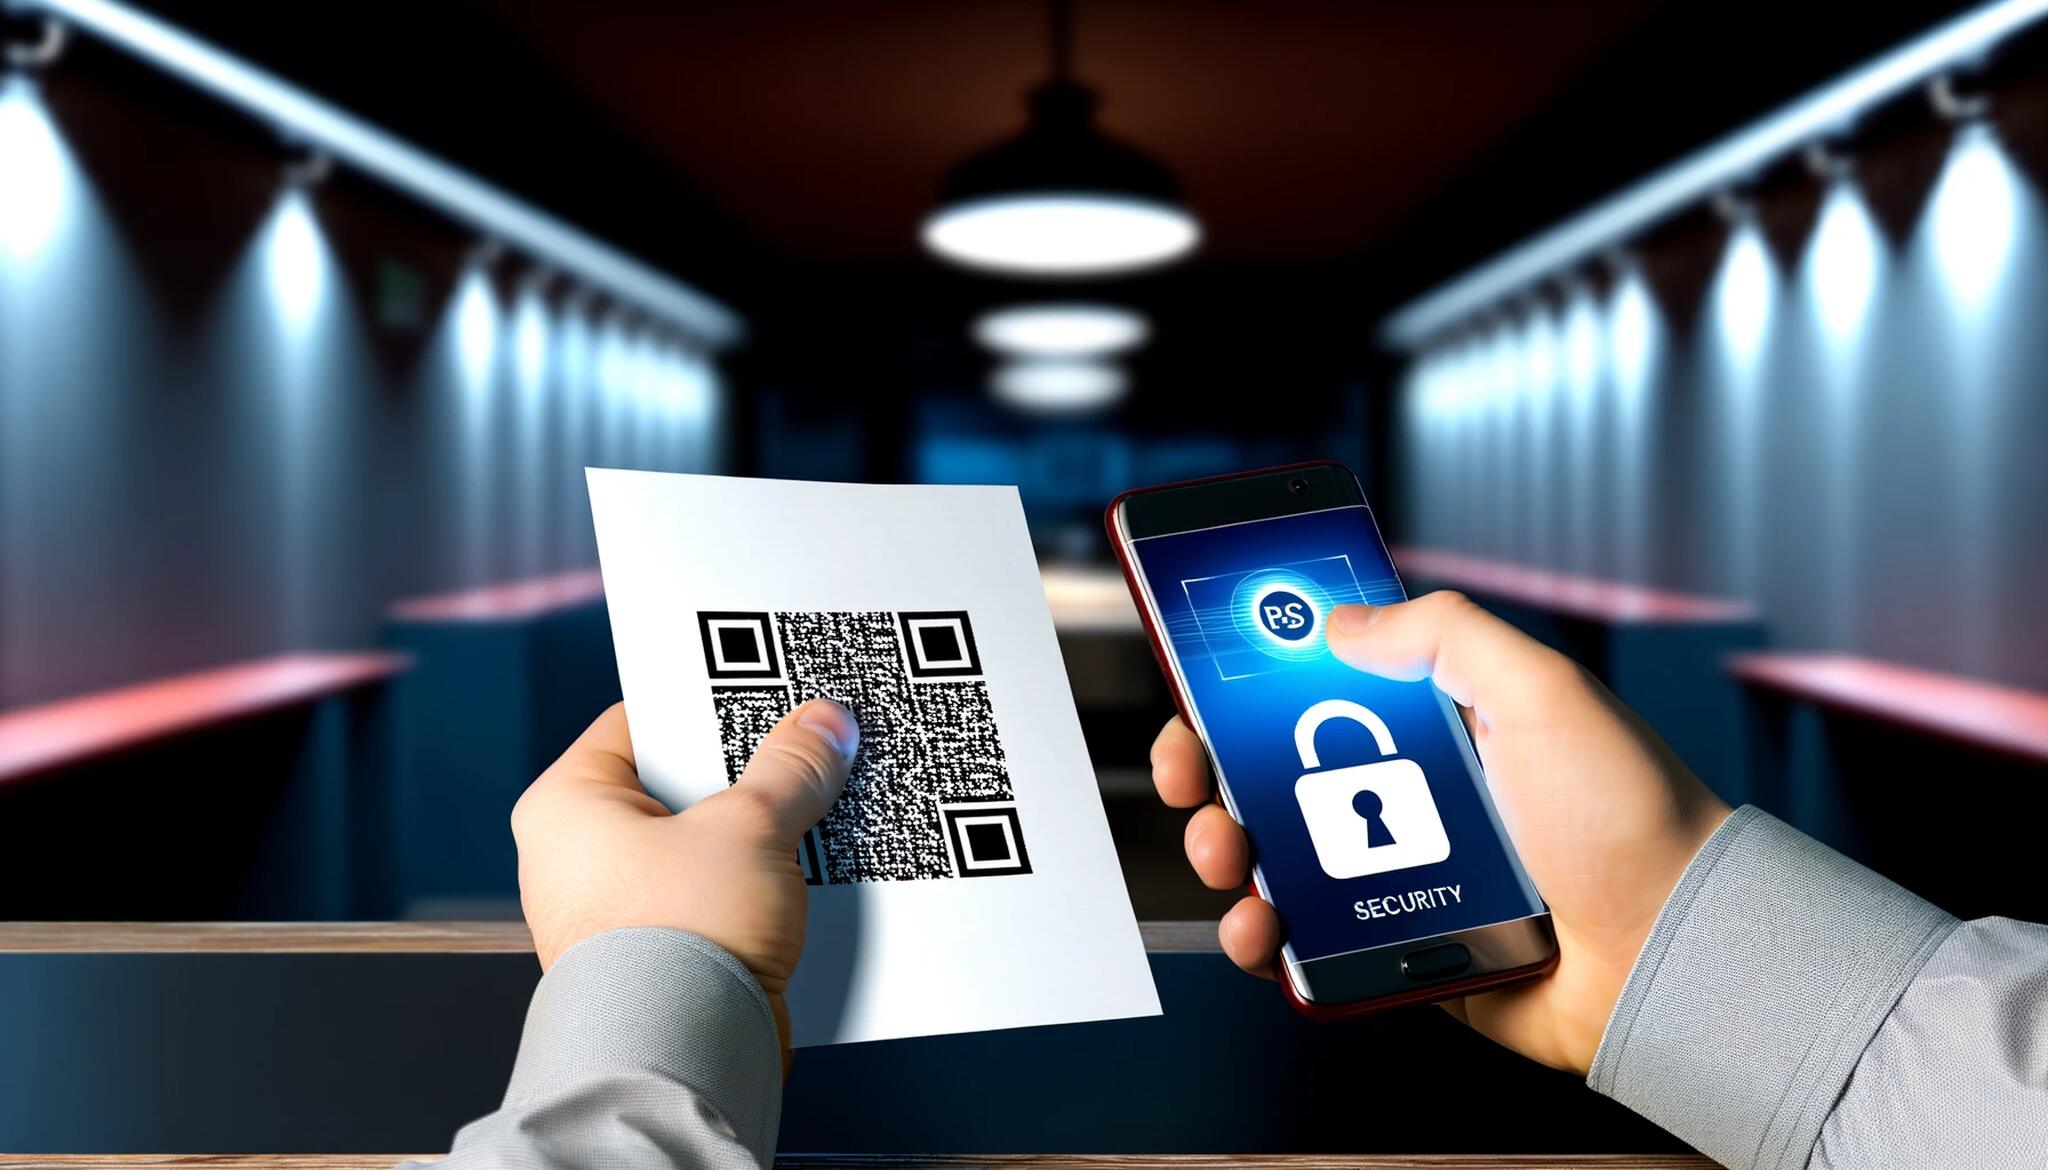 person's hands holding a smartphone, and a paper showing a QR code